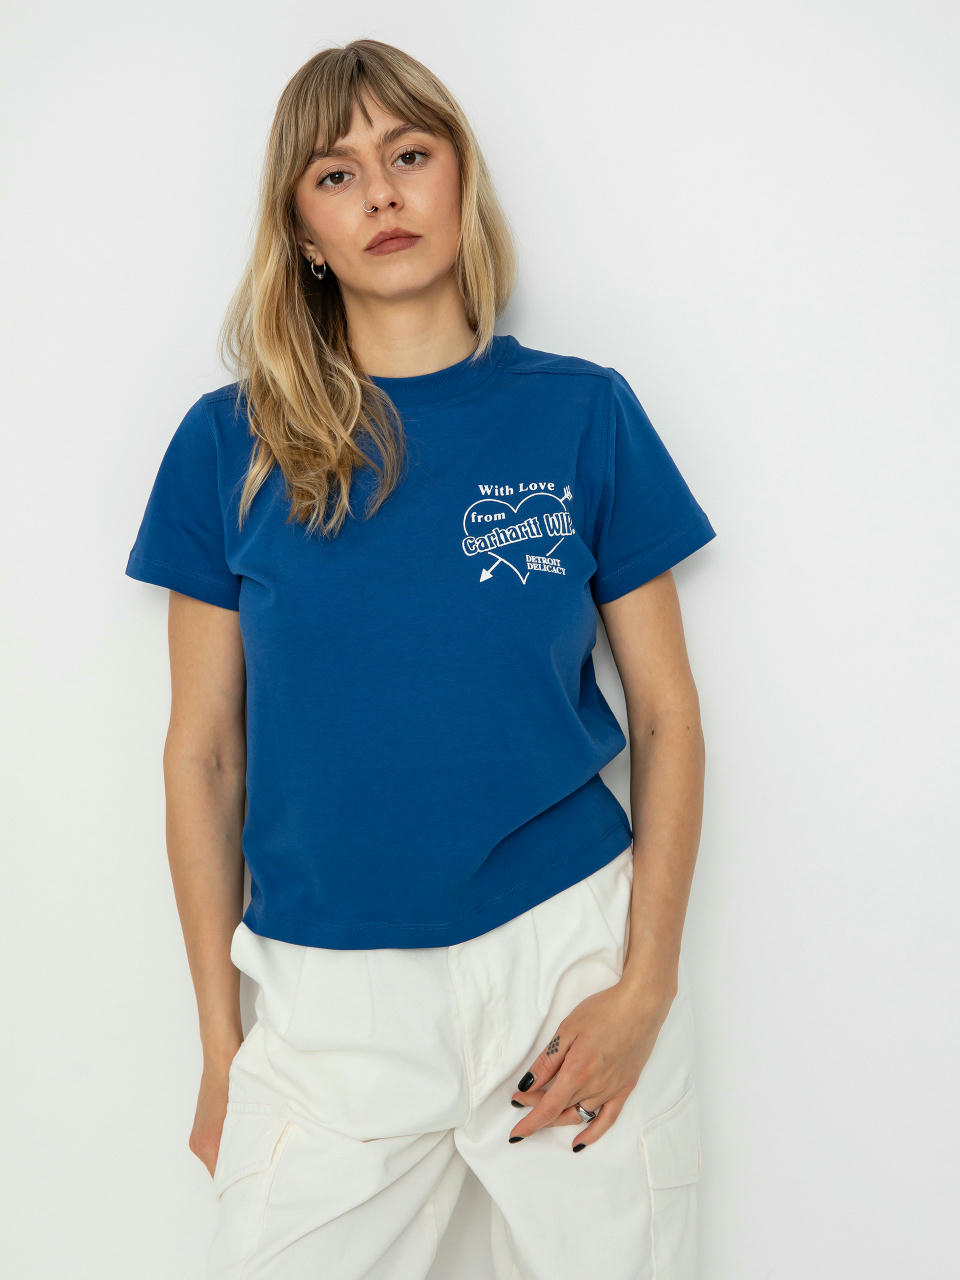 Carhartt WIP T-Shirt Delicacy Wmn (acapulco/white)